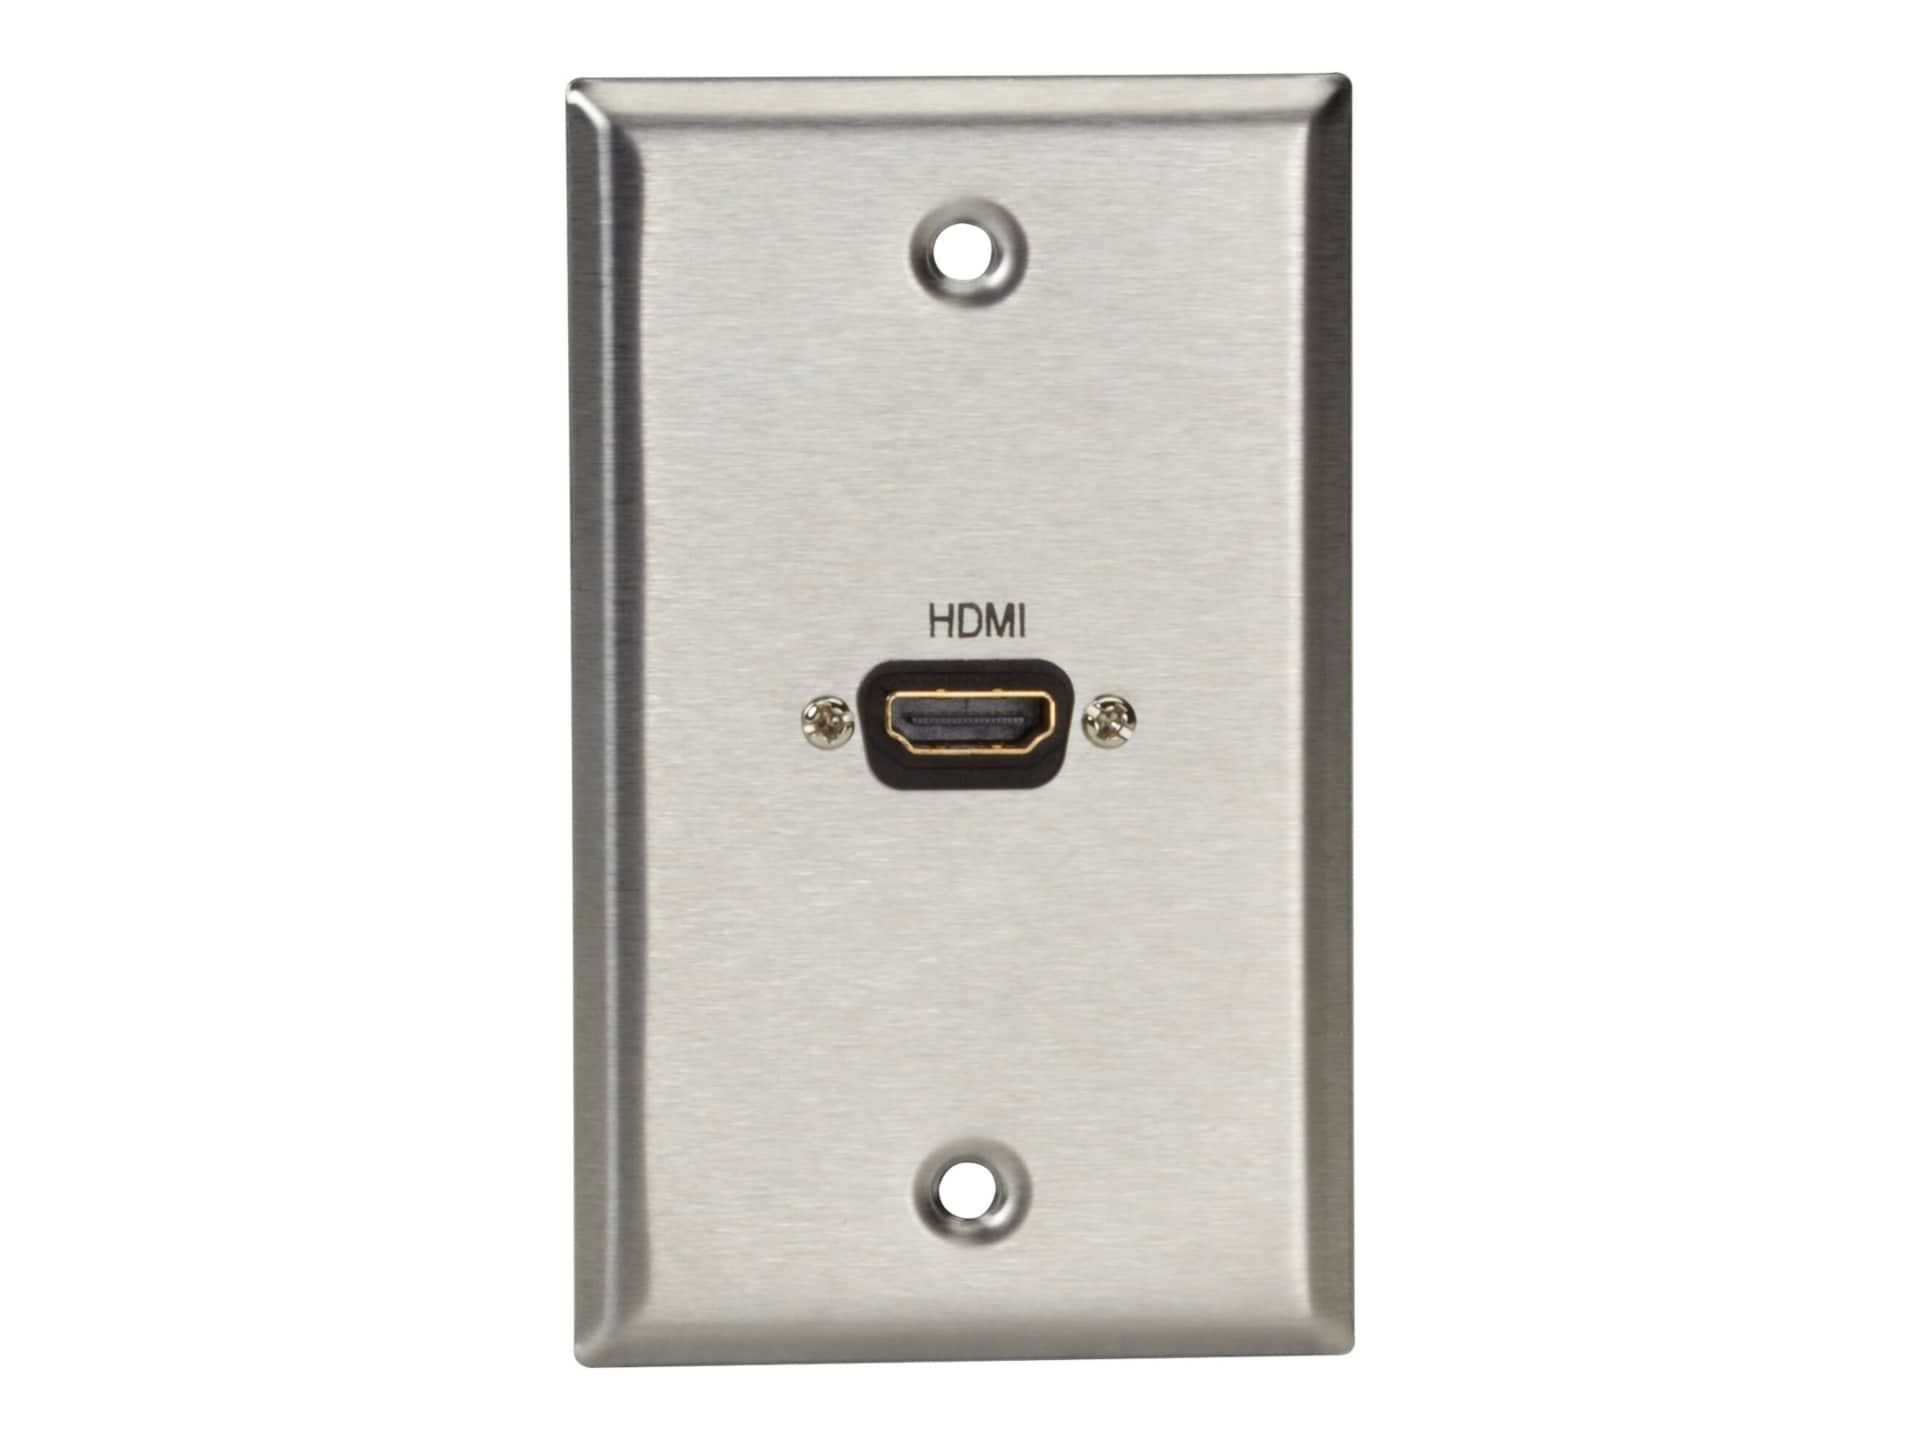 Black Box A/V Stainless Wallplate Feed-Through Coupler - mounting plate